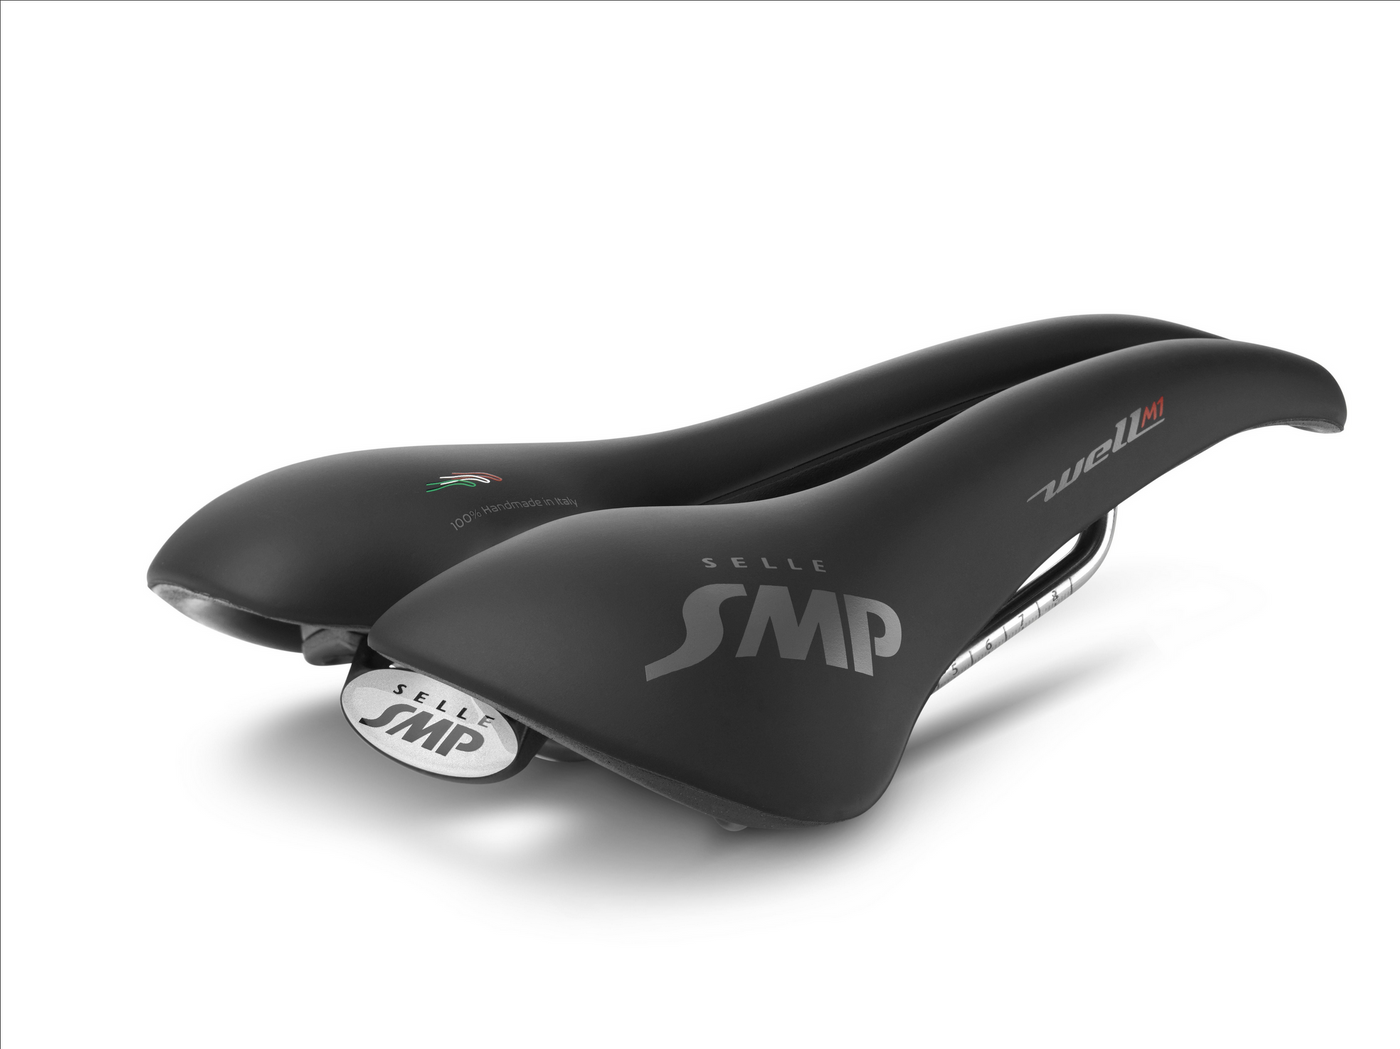 Smp well m1 gel saddle